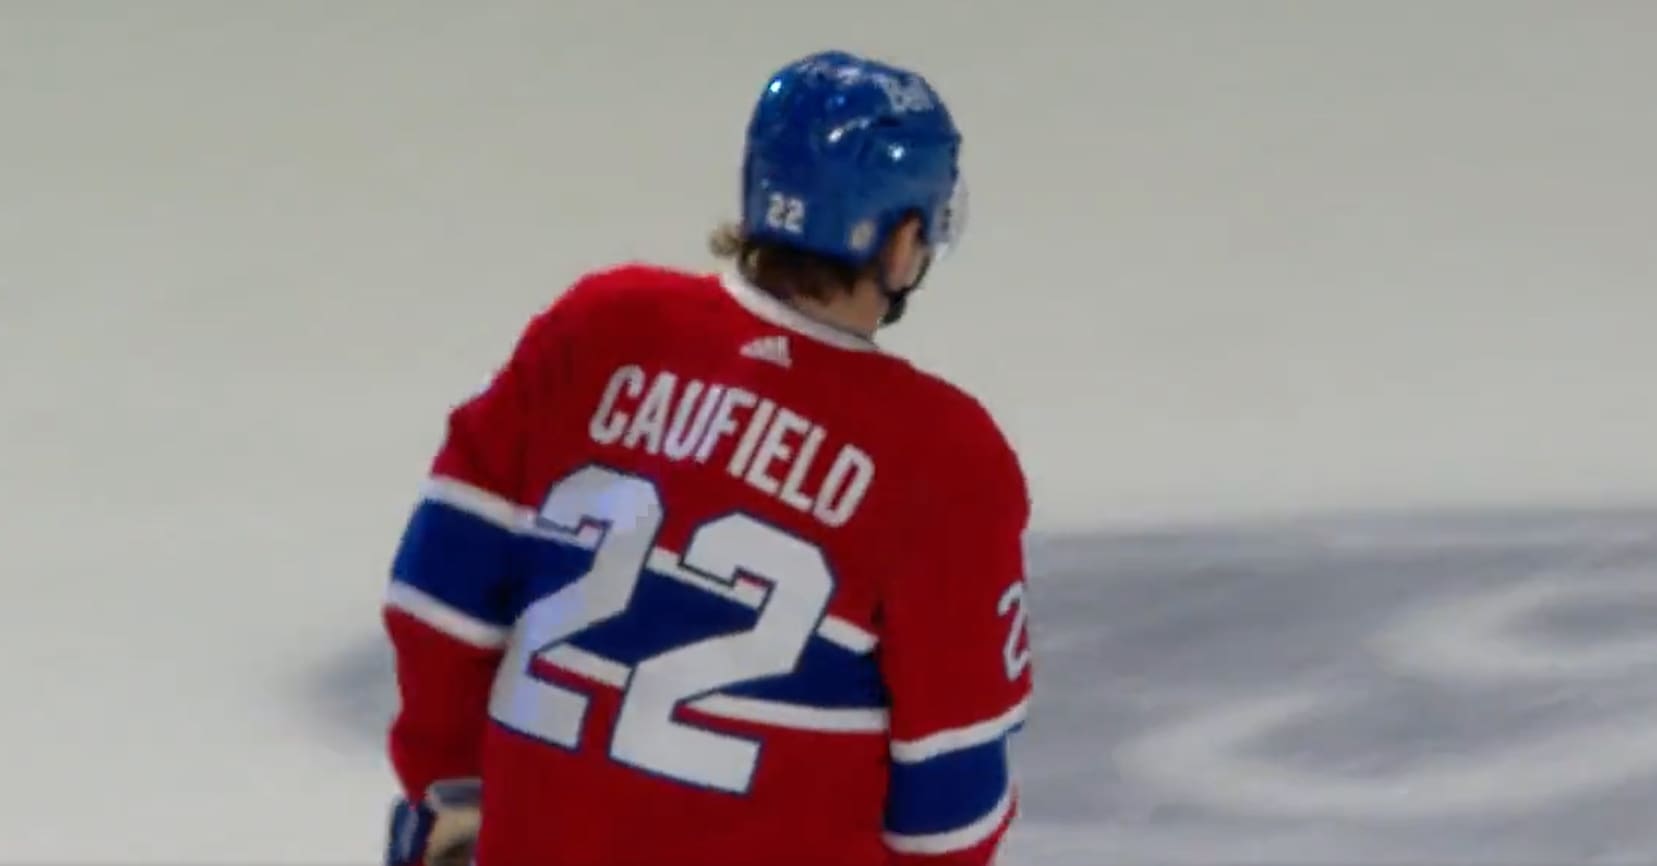 Cole Caufield has now scored in his last 5 games against Toronto